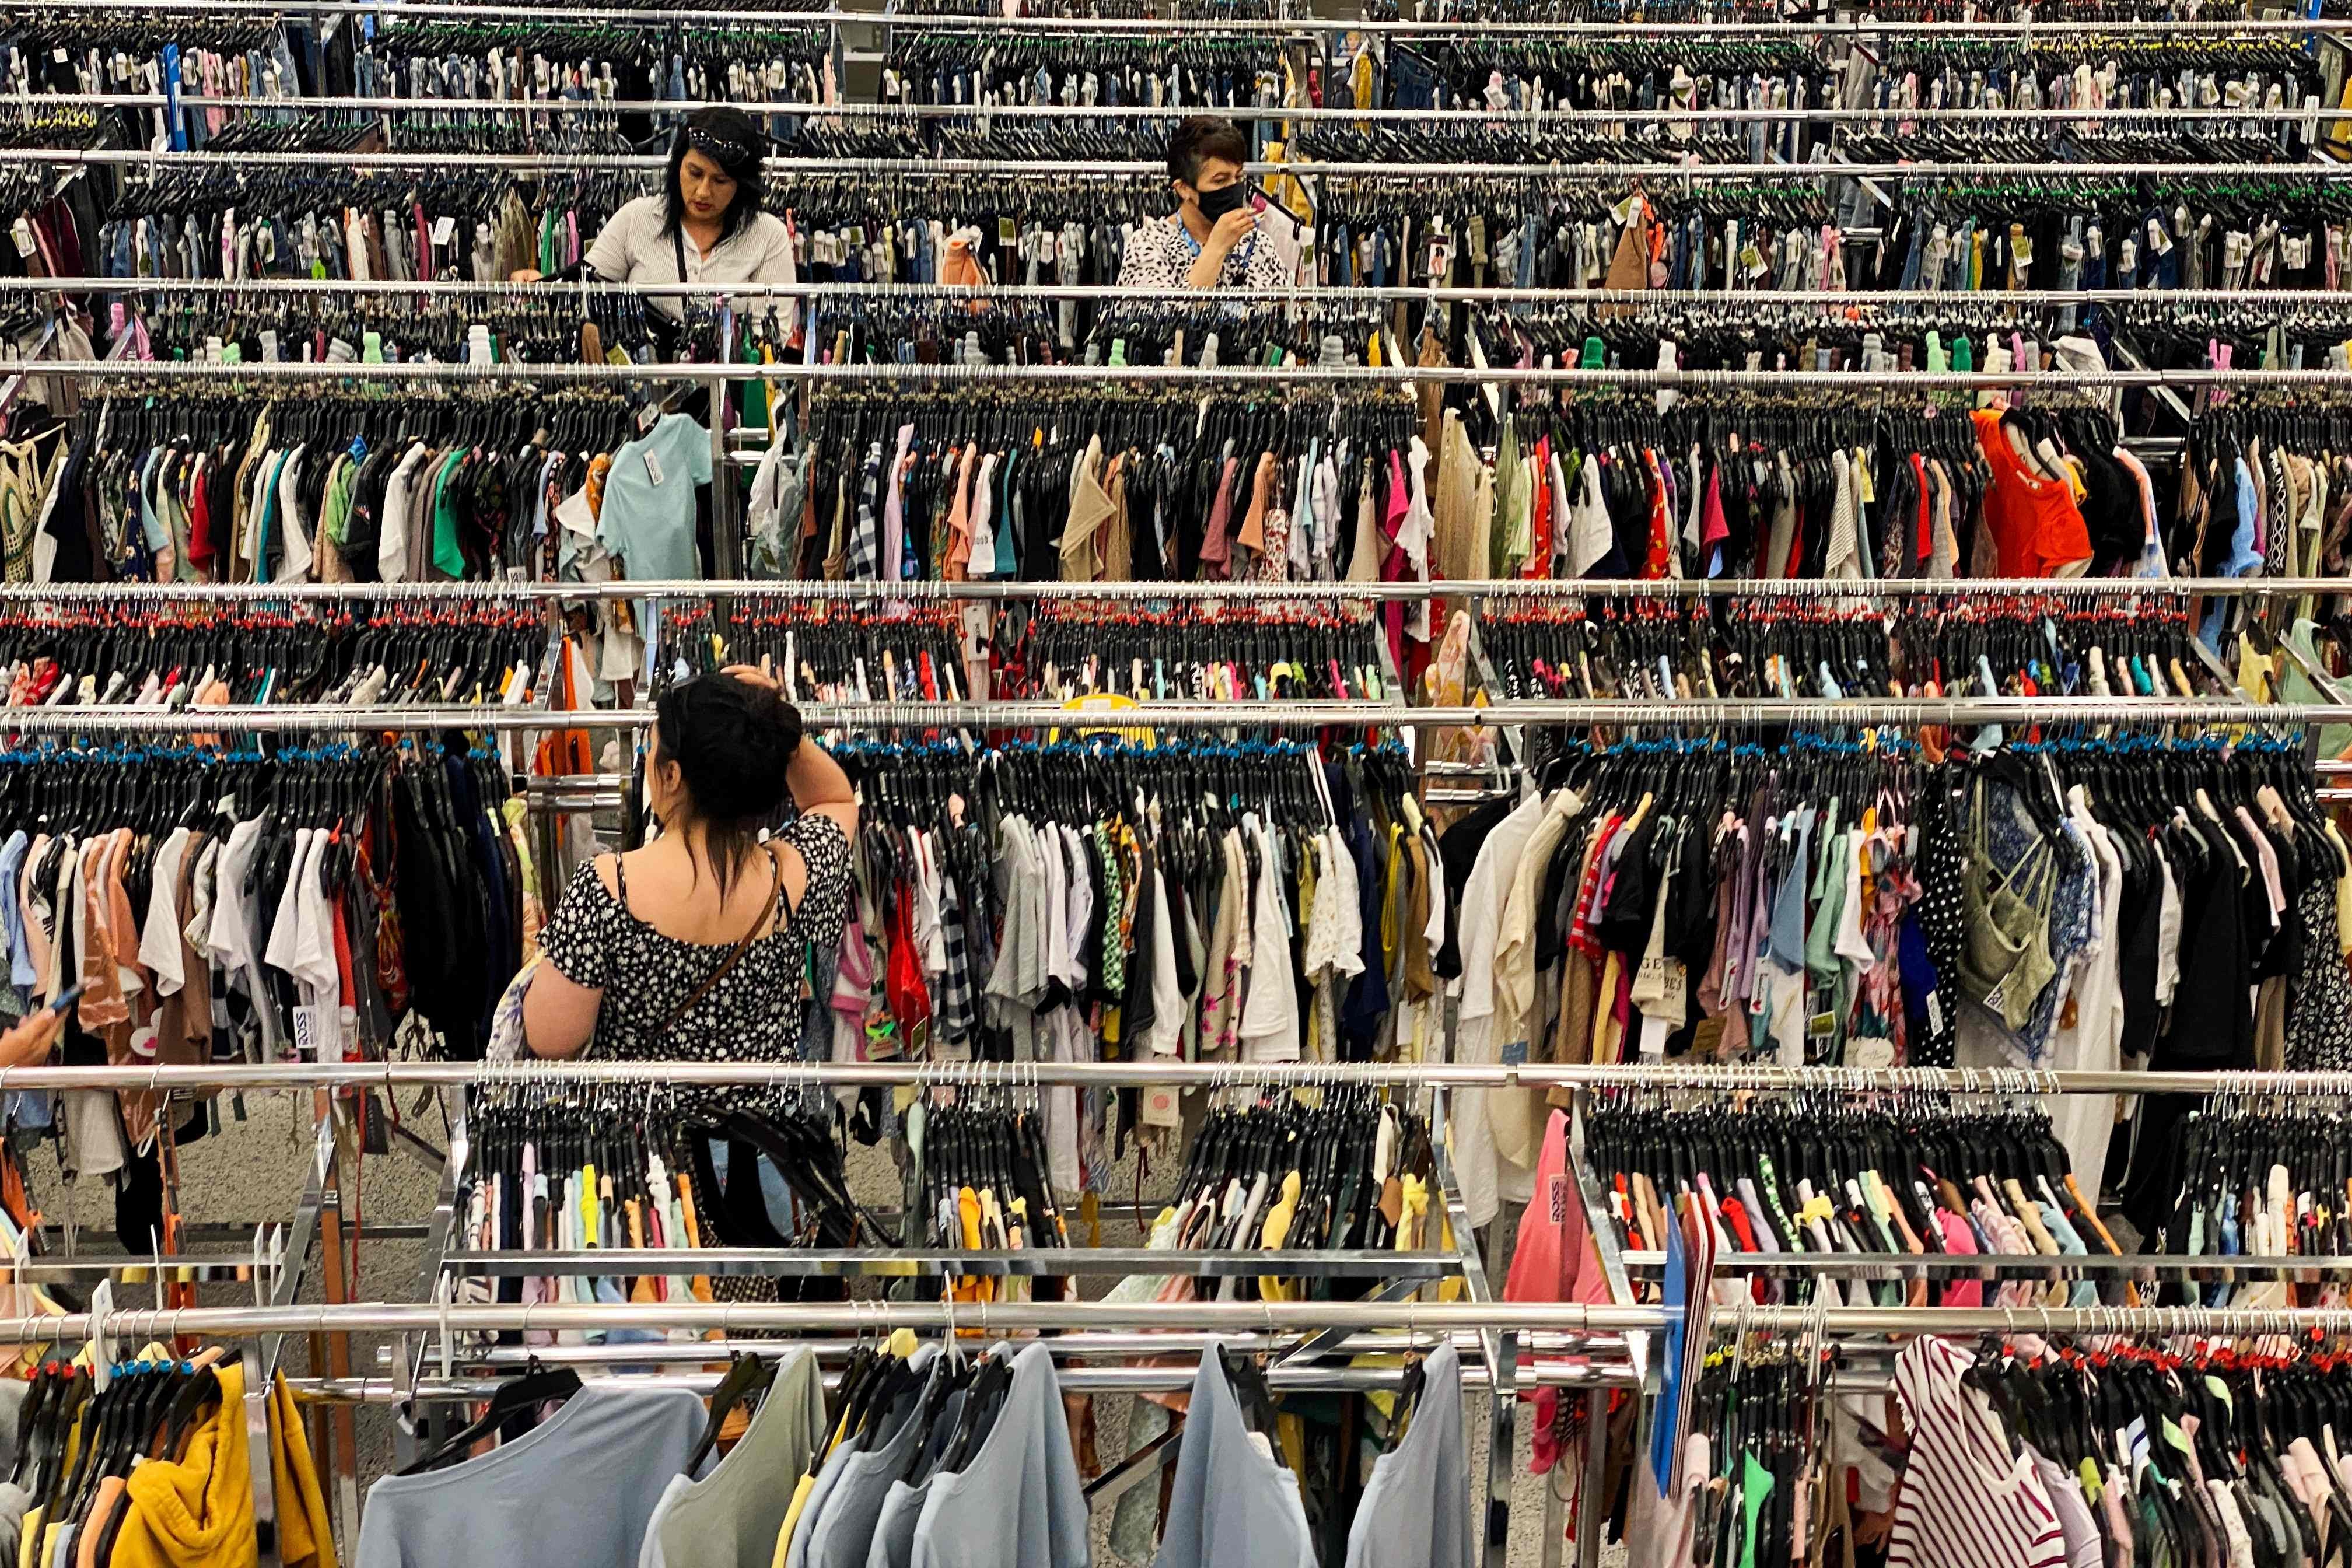 Customers browse racks of clothing at a discount shop in Las Vegas, Nevada, US, In May 2022. Photo: AFP